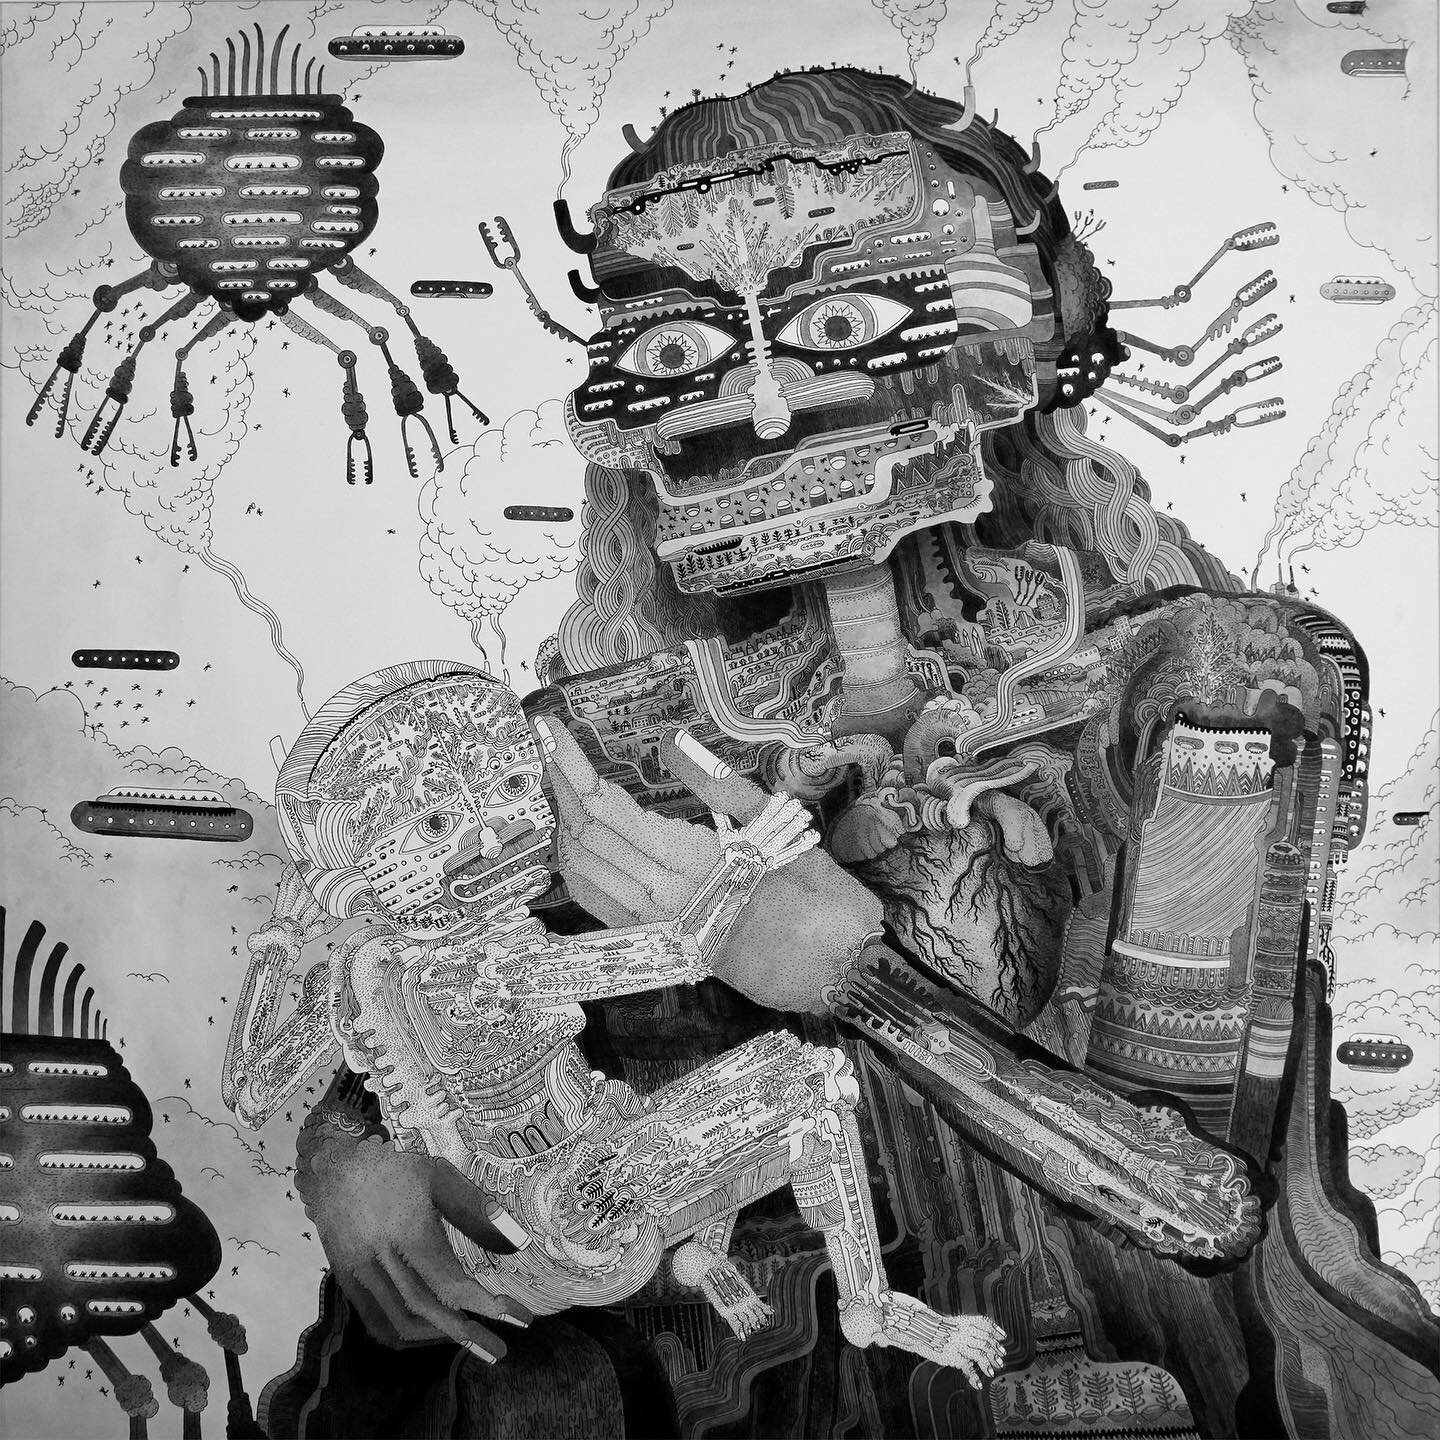 Drawn and painted about 8 years ago from dreams about A.I., robotics, and nanobots. Also inspired by &lsquo;Mother with child&rsquo; historical artworks.&nbsp;&nbsp;

Mothership, 30 x 30 in. India Ink on Arches paper, 2015. Procreating and opening lo